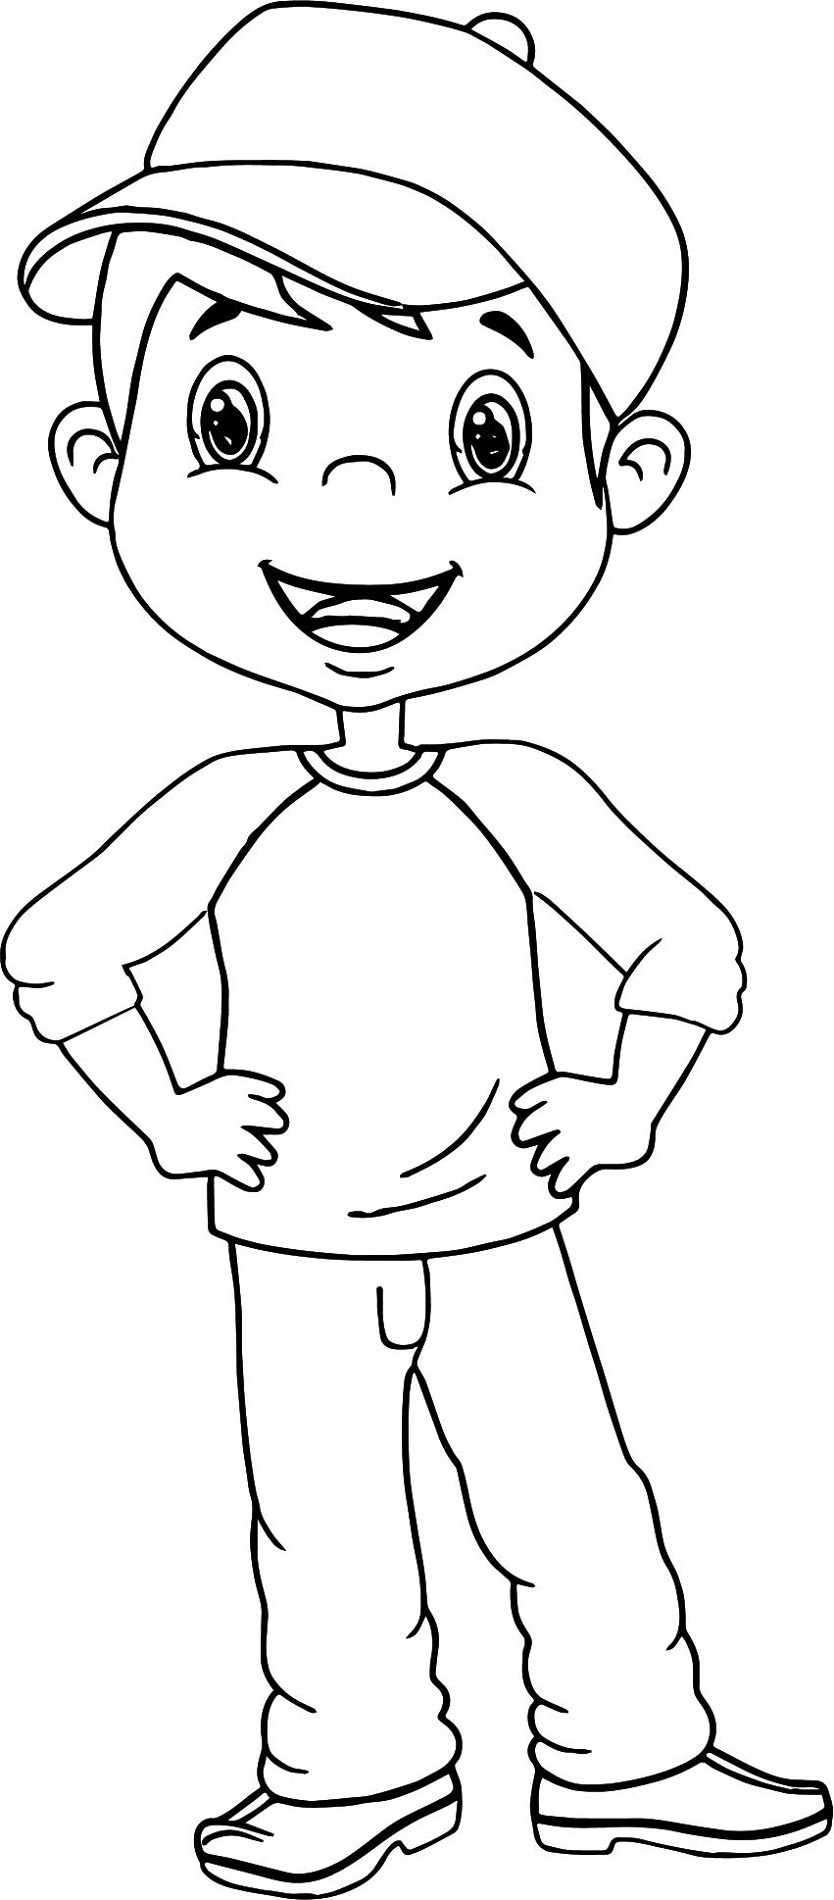 Coloring Pages For Boys Learn
 Cartoon Coloring Pages Boys – Learning Printable